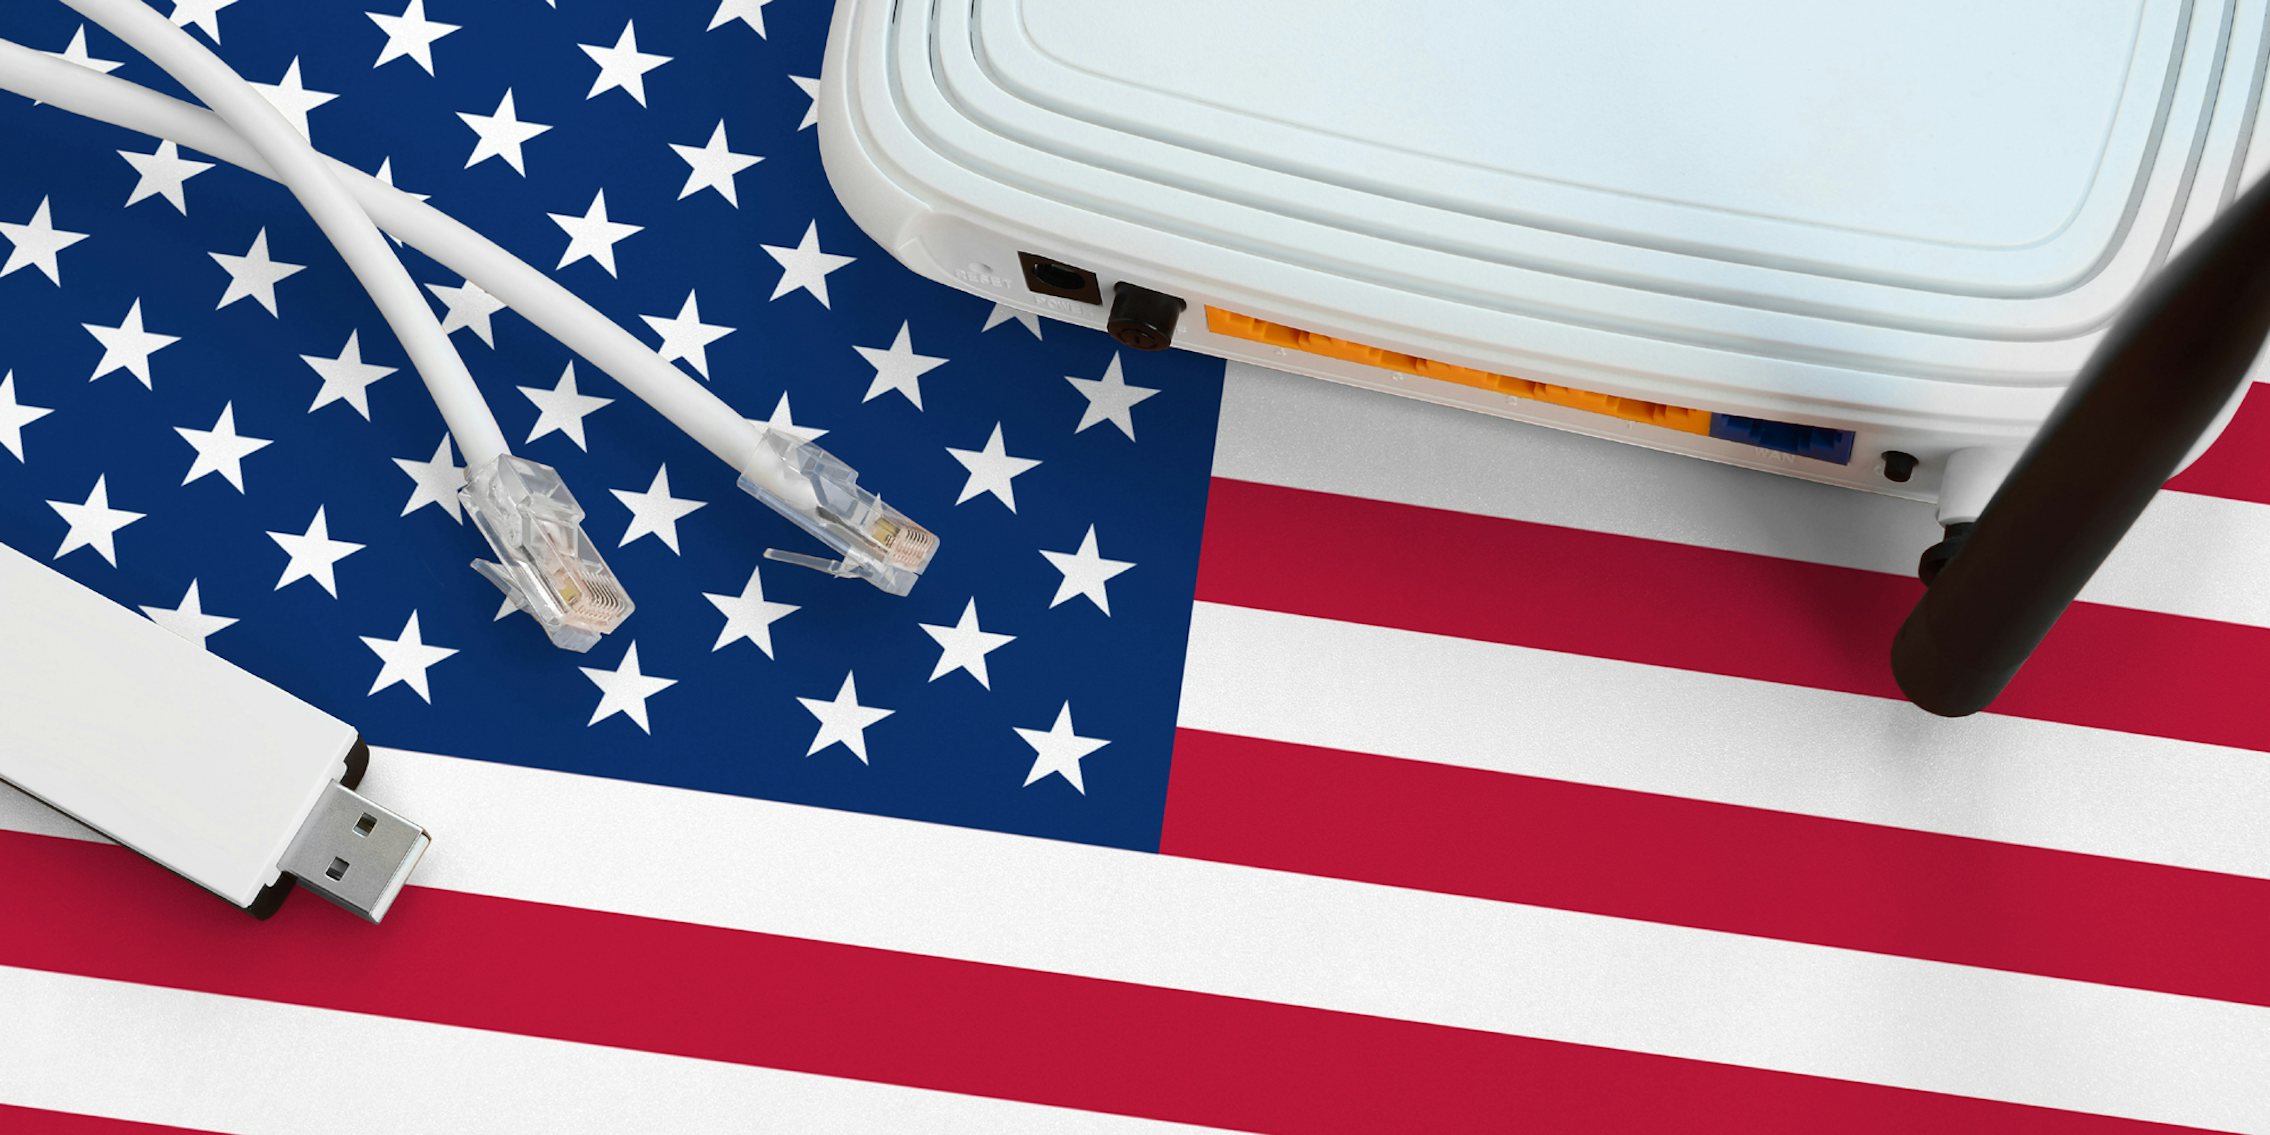 A broadband router, ethernet cables, and USB stick lying on top of an American flag.